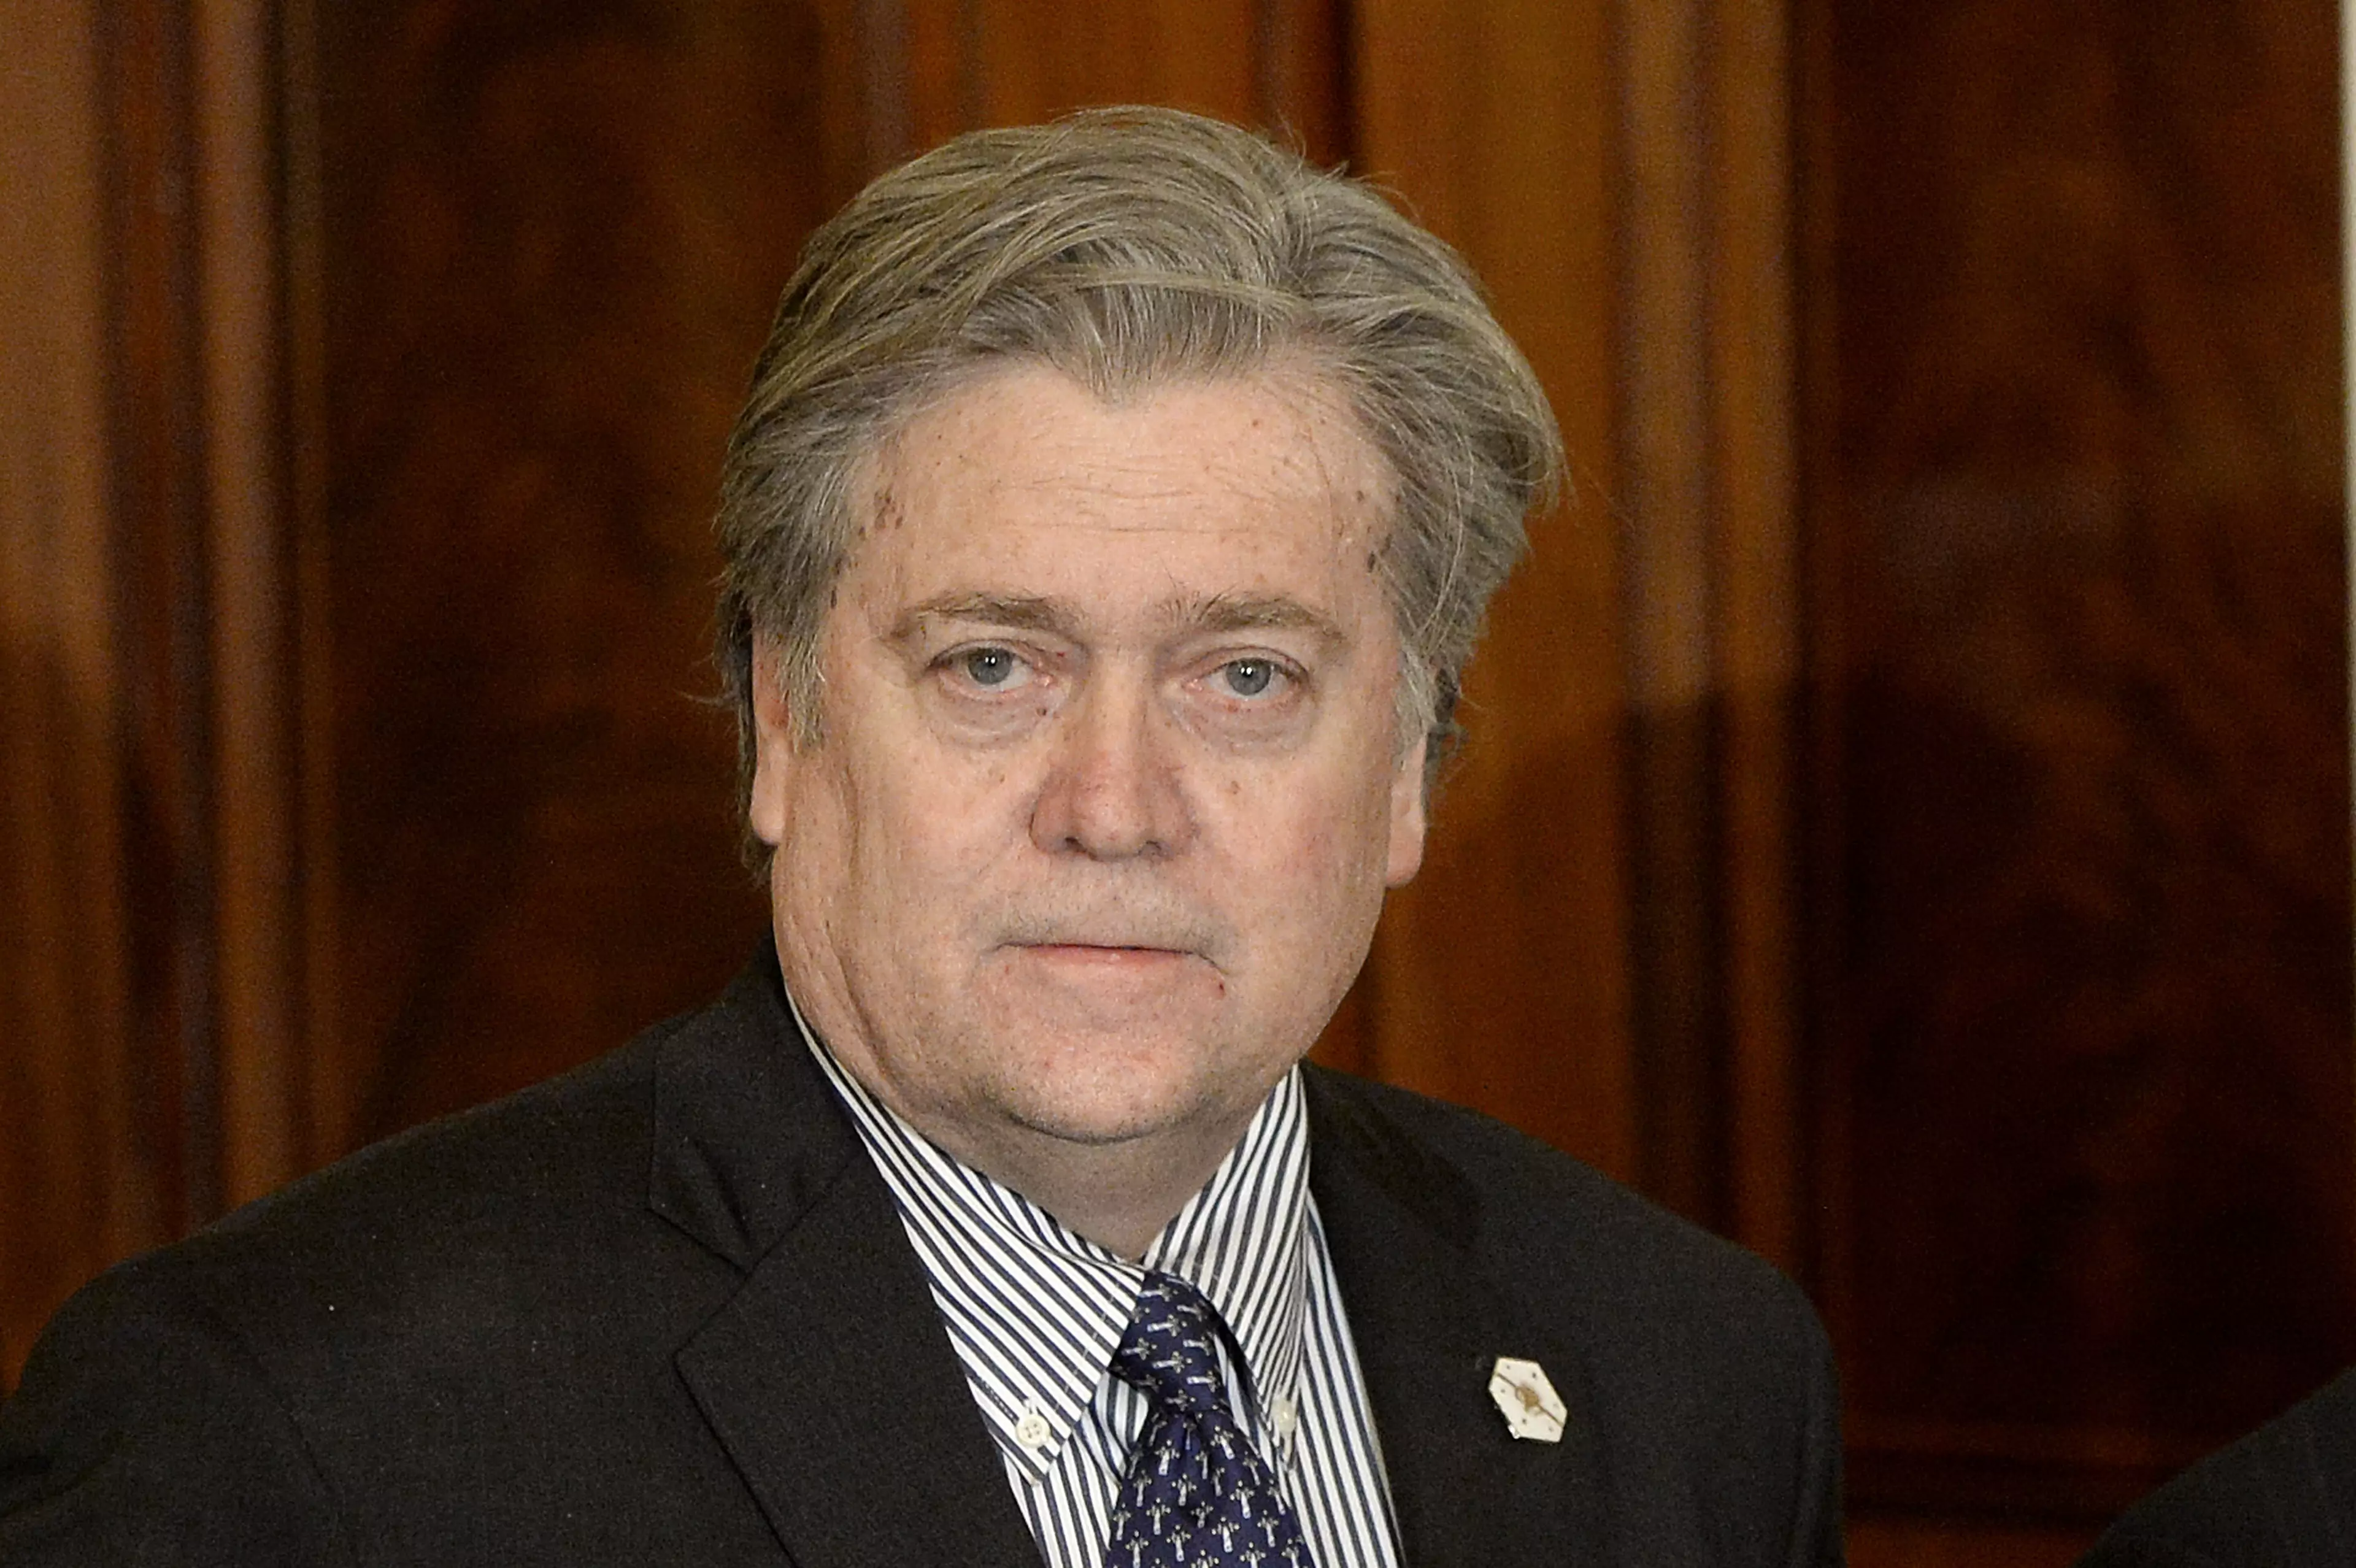 Steve Bannon was one of Trump's closest advisors, however he was ceremoniously dumped in August.